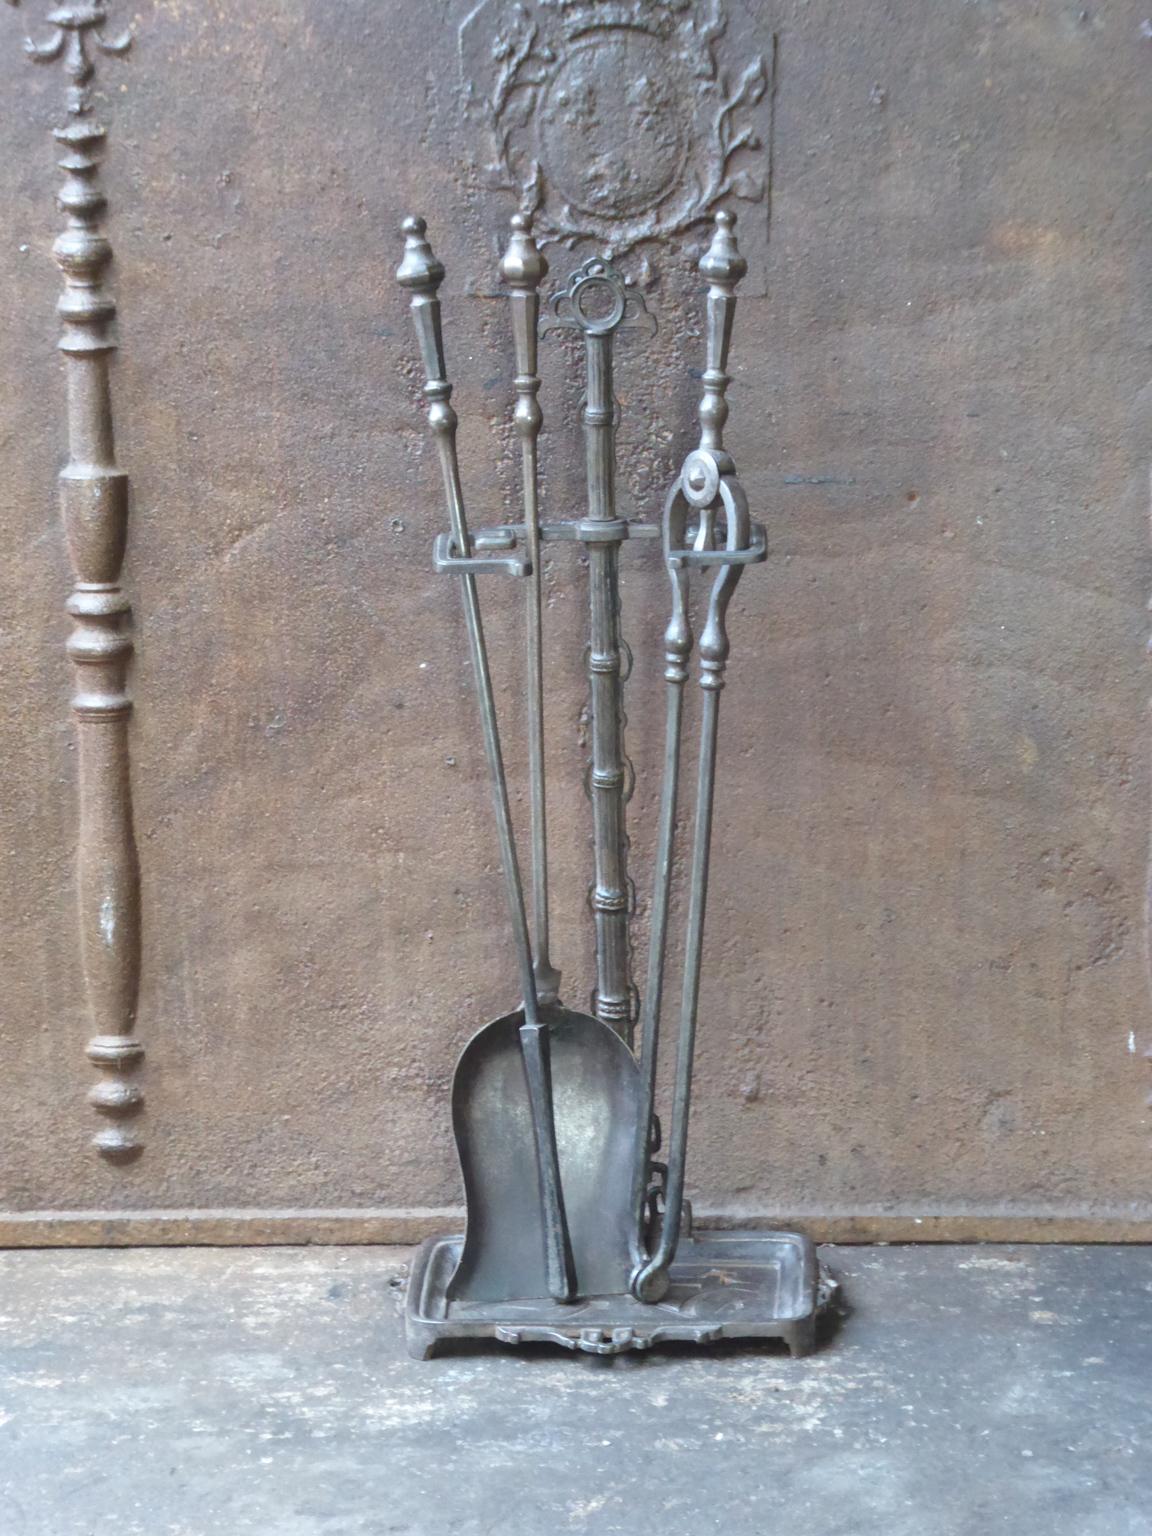 19th century English Victorian fireplace toolset made of cast iron and wrought iron. The toolset consists of three tools and a stand. The condition is good.













  